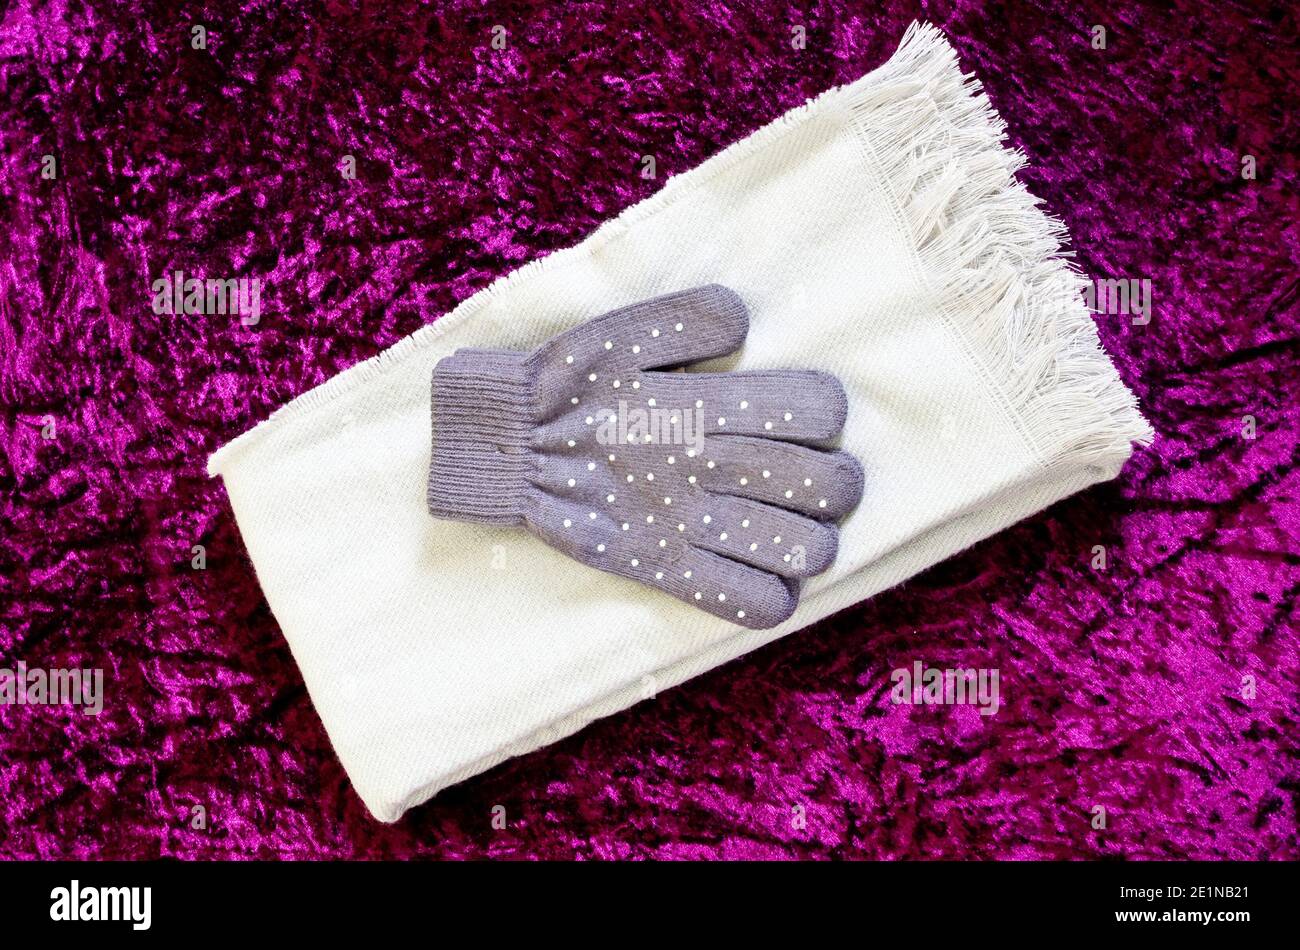 Women's or Ladies Fabric White Scarf and Sequin Grey or Gray Pair of Gloves Stock Photo